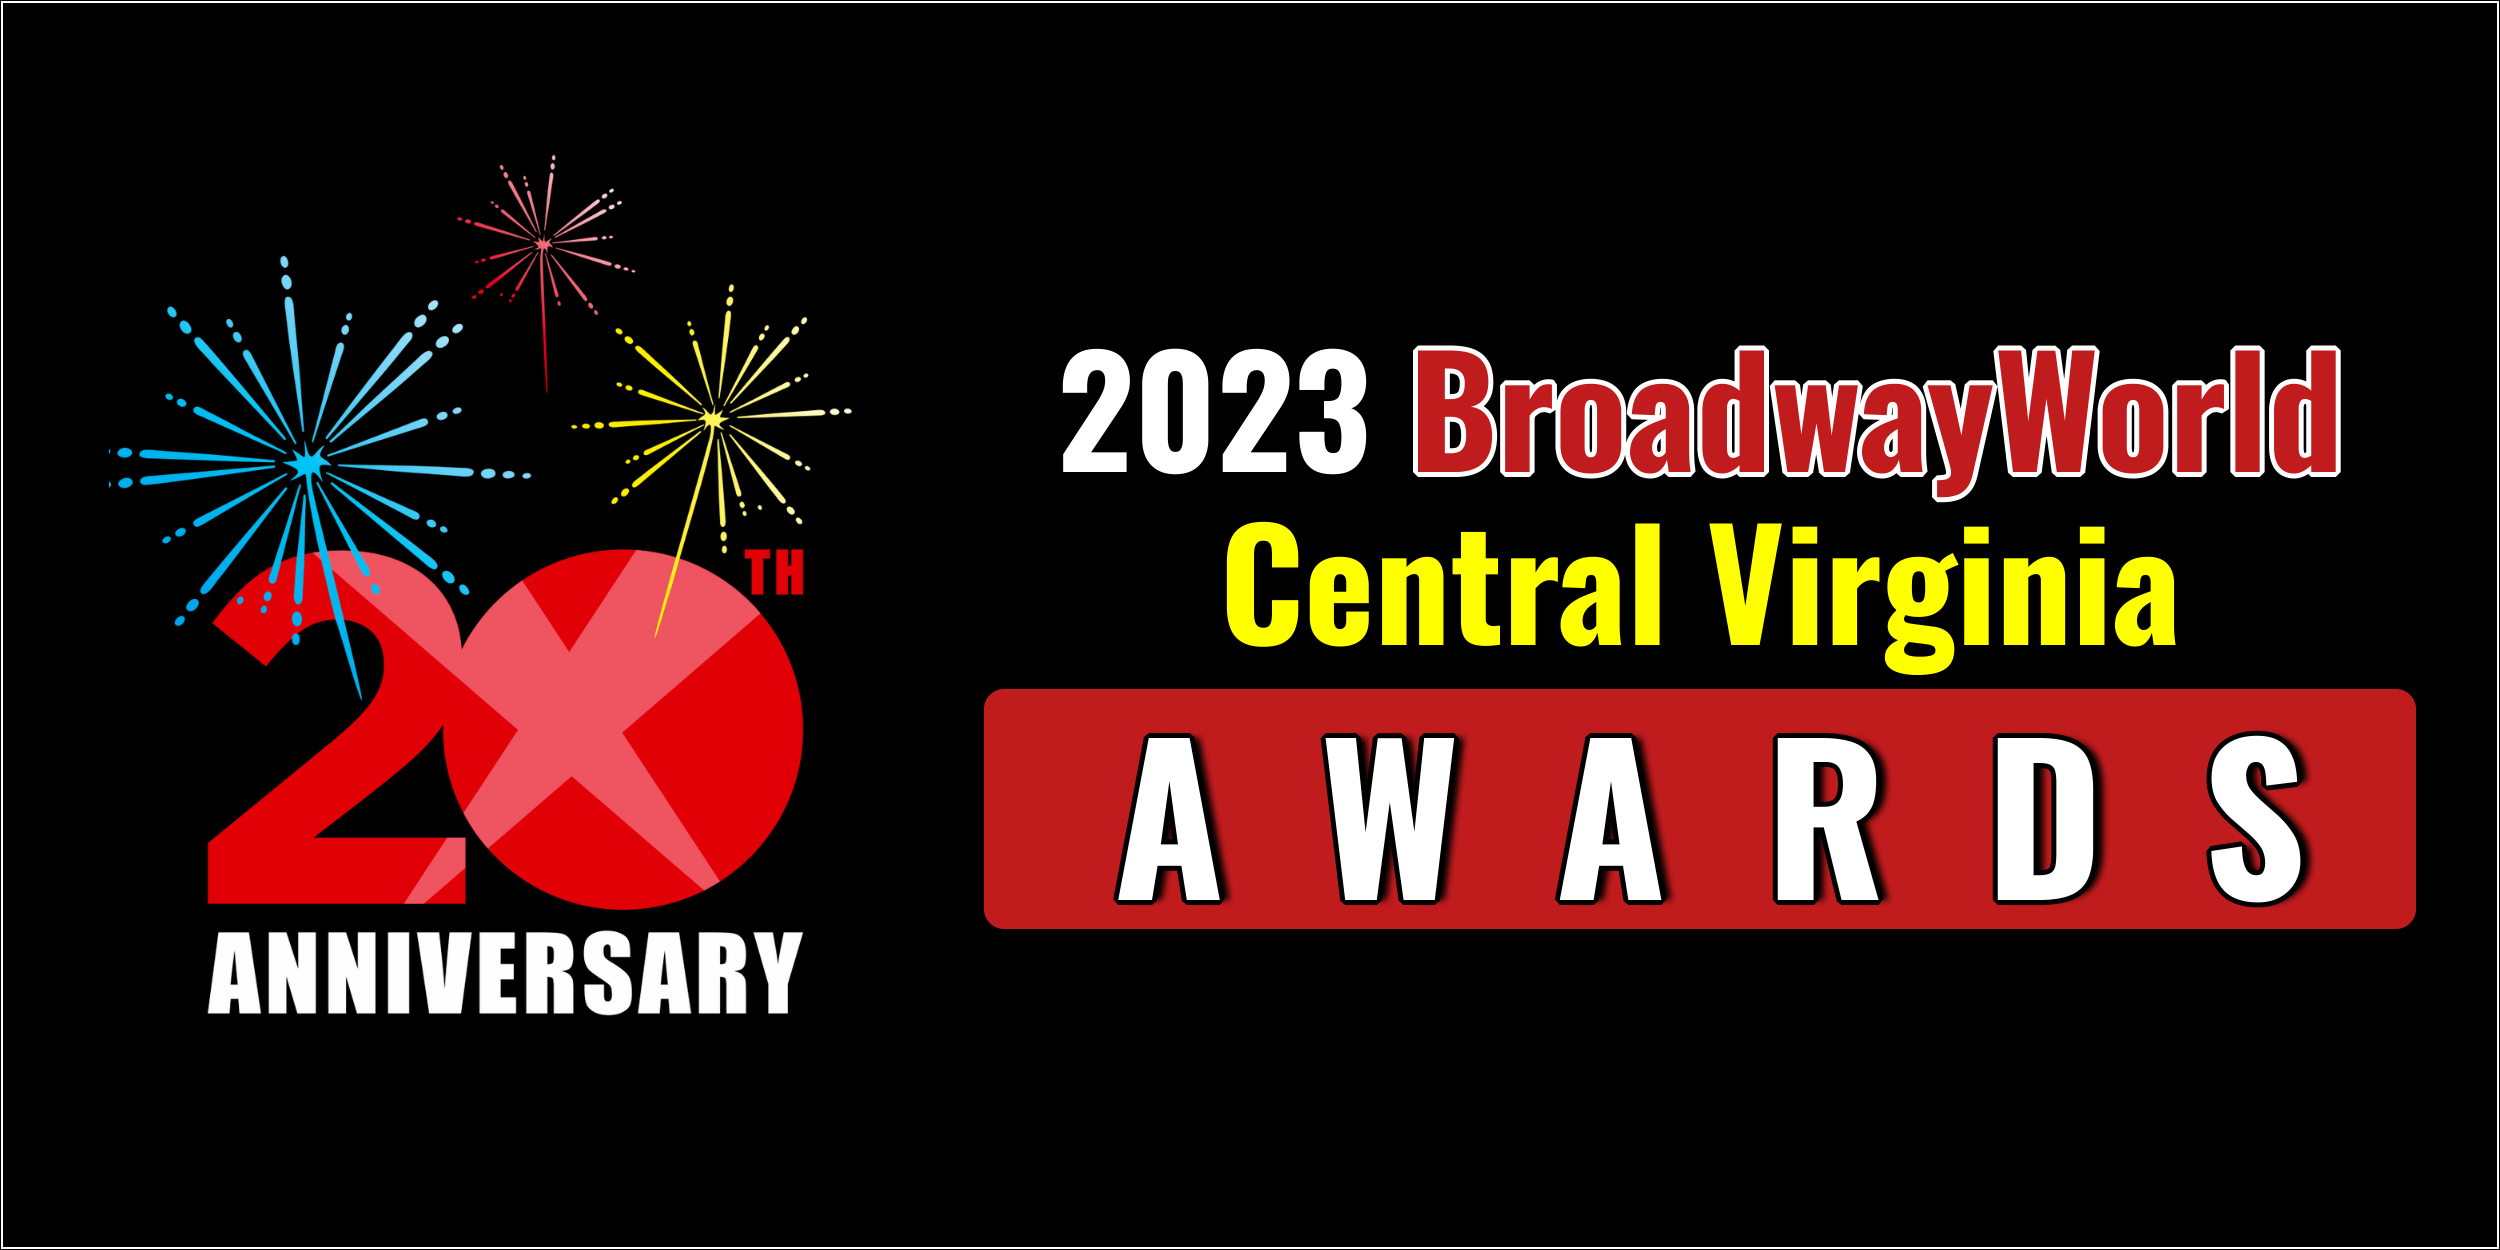 BroadwayWorld Central Virginia Awards December 5th Standings; THE PROM Leads Best Musical! 